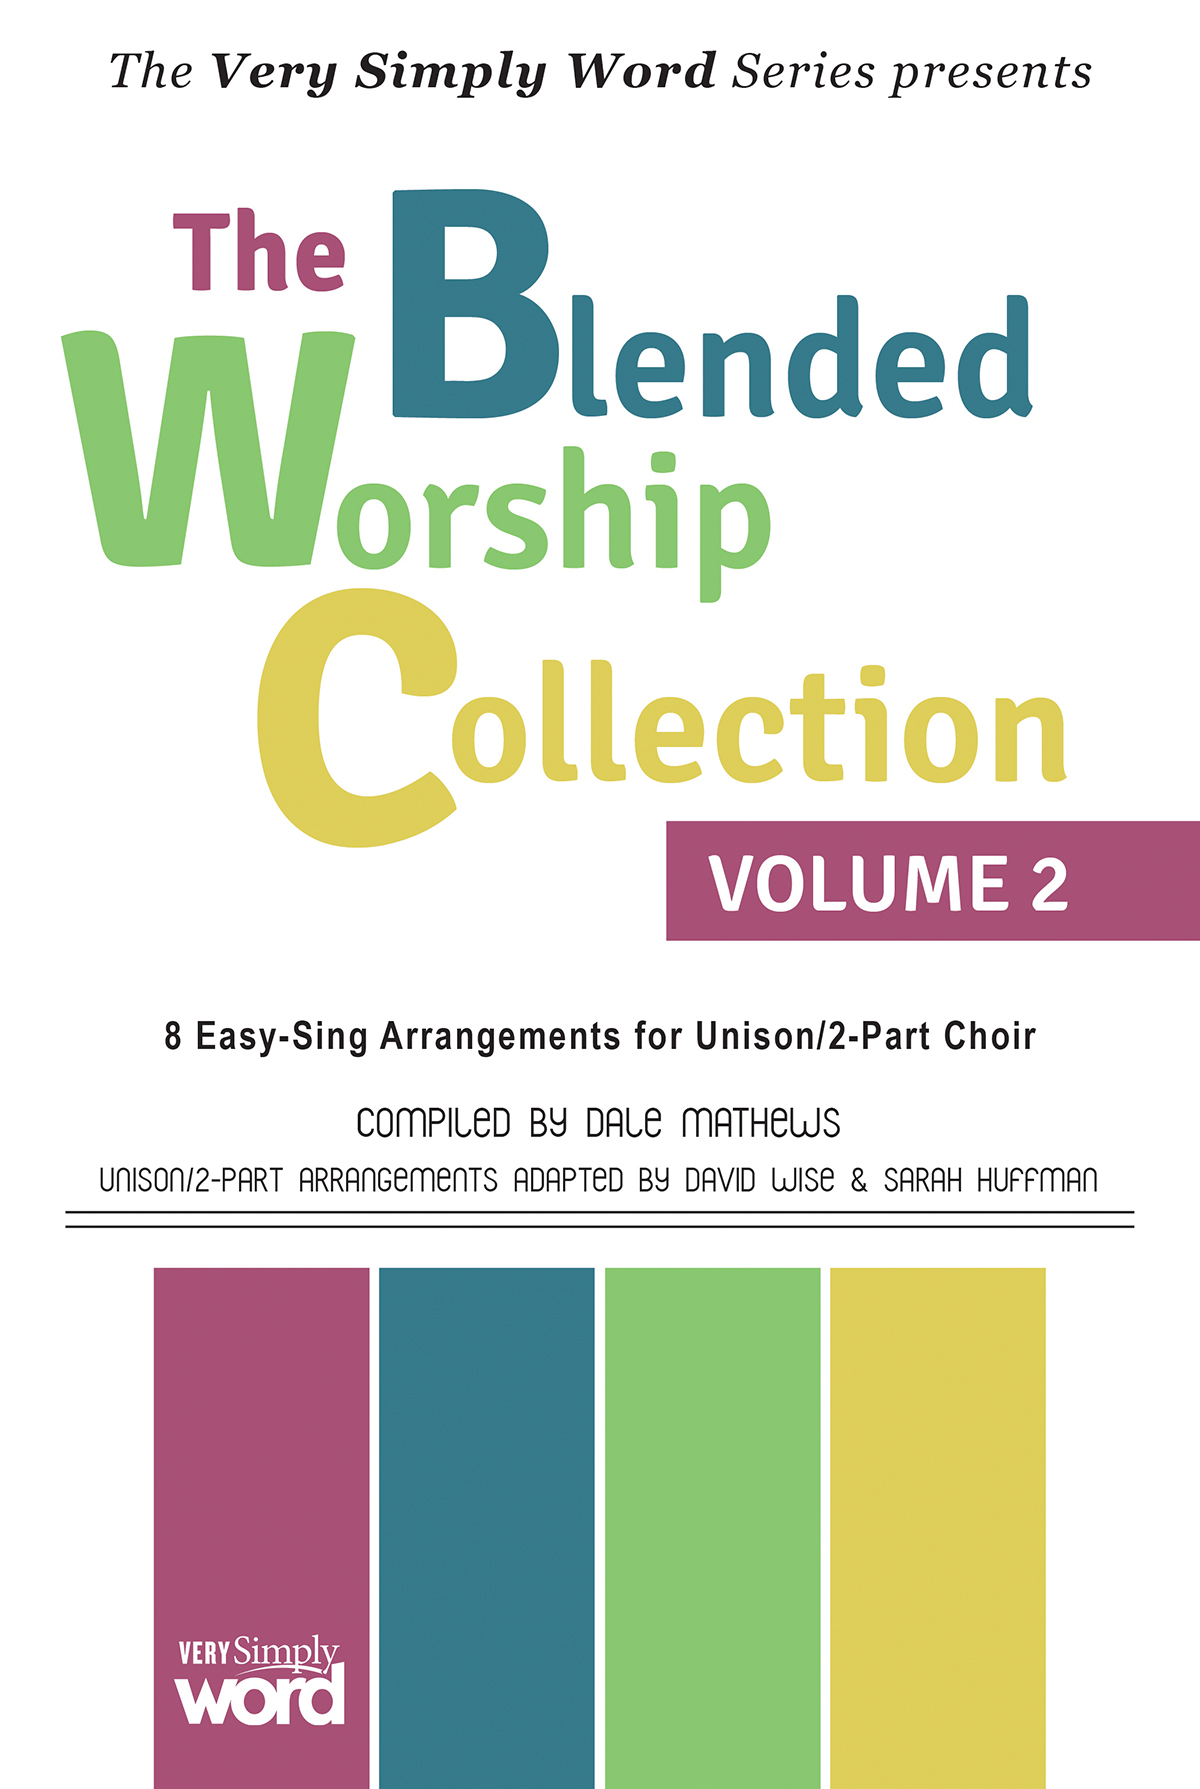 The Blended Worship Collection Volume 2